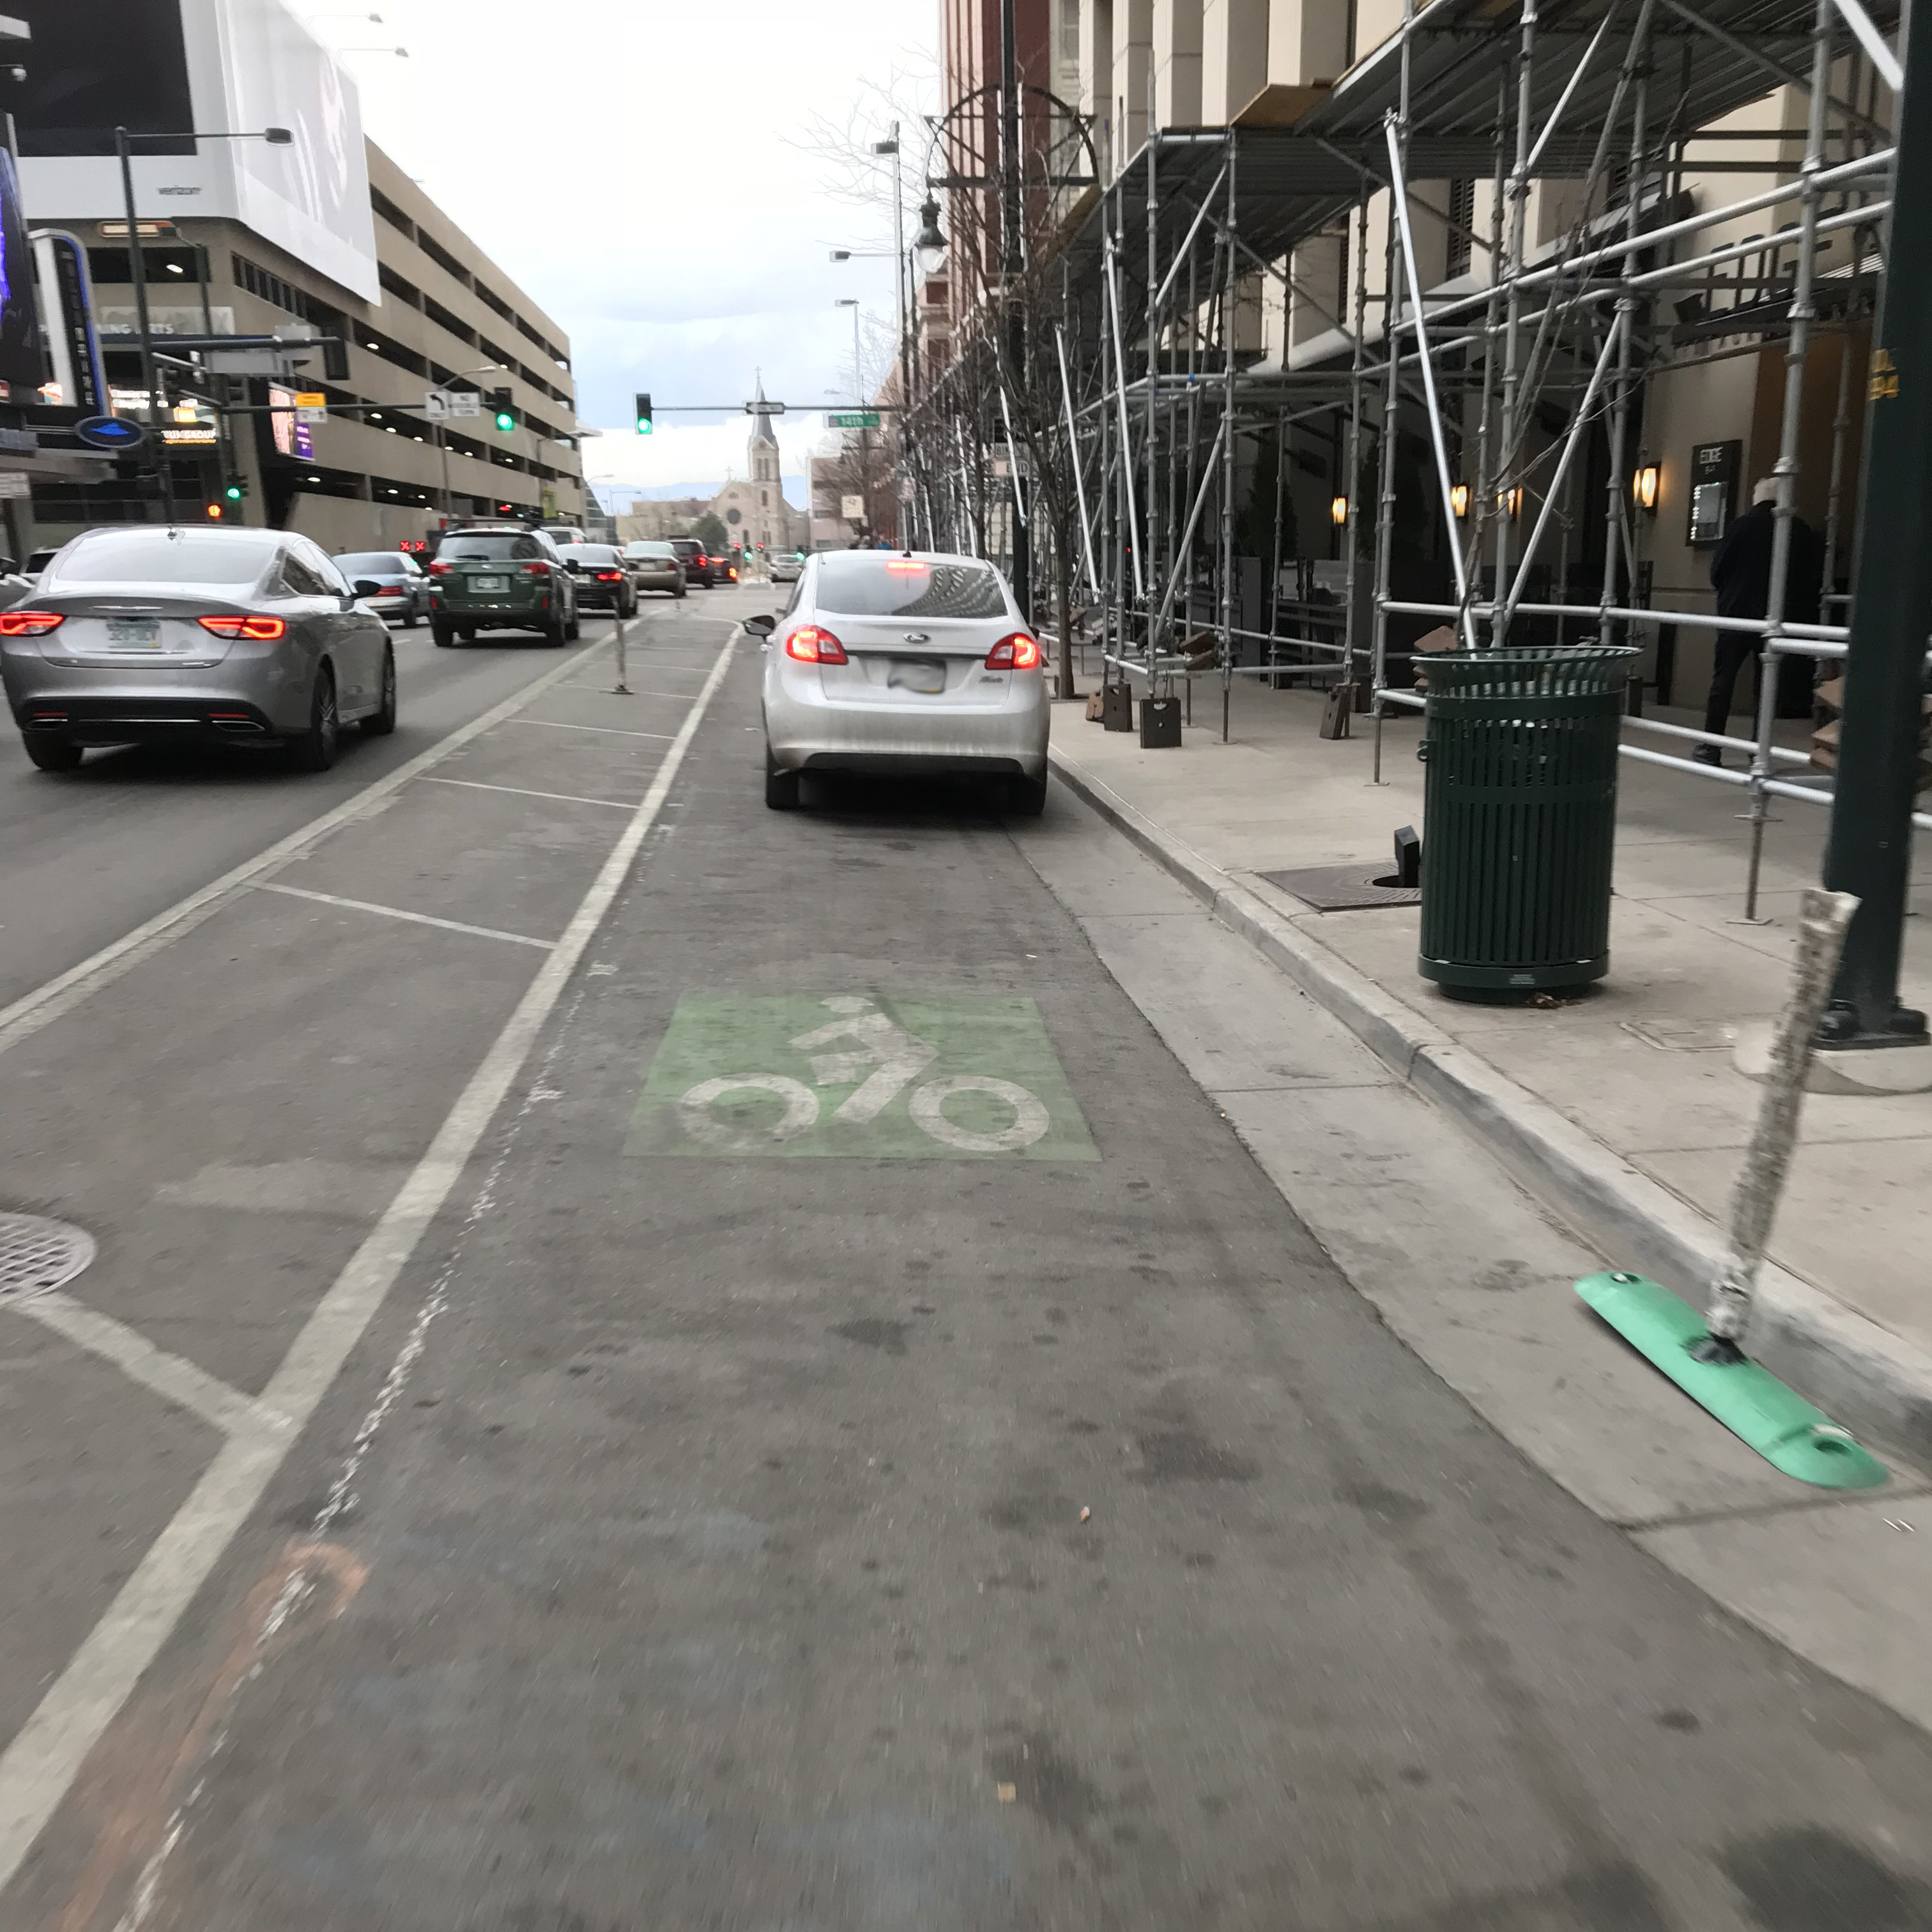 Things in the bike lane campaign